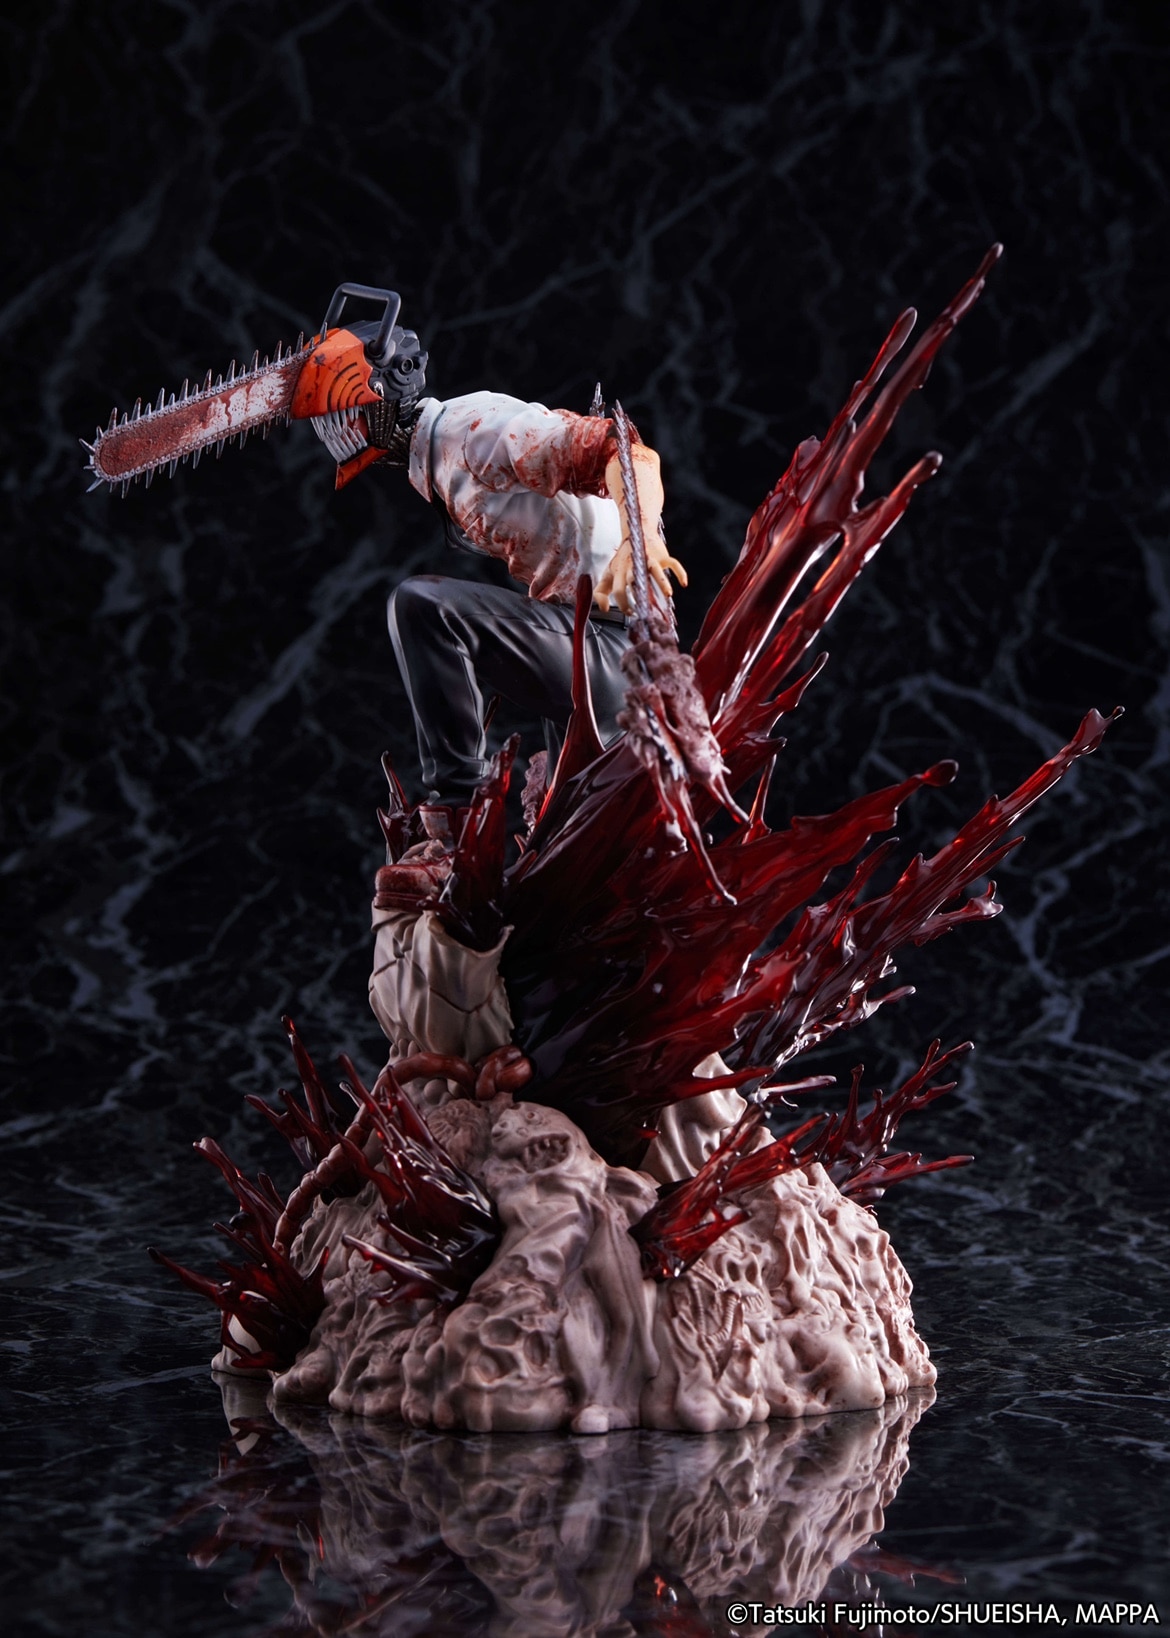 Chainsaw Man – Denji Devil Form-Themed Badass Action Figure (Box/No Box) Action & Toy Figures